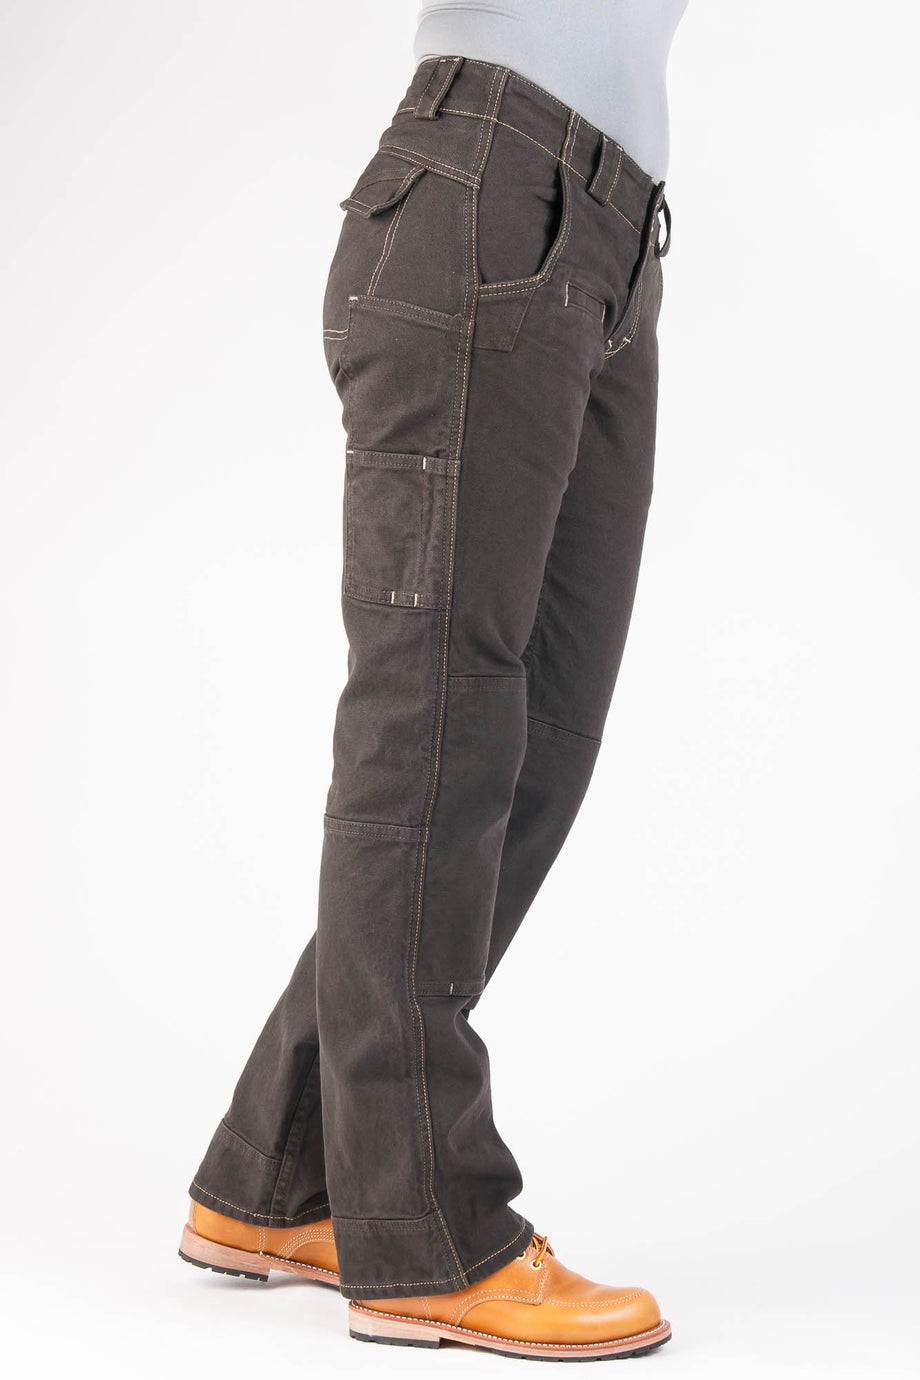 Canvas Utility Work Pant - Timber Brown – Diamond Gusset